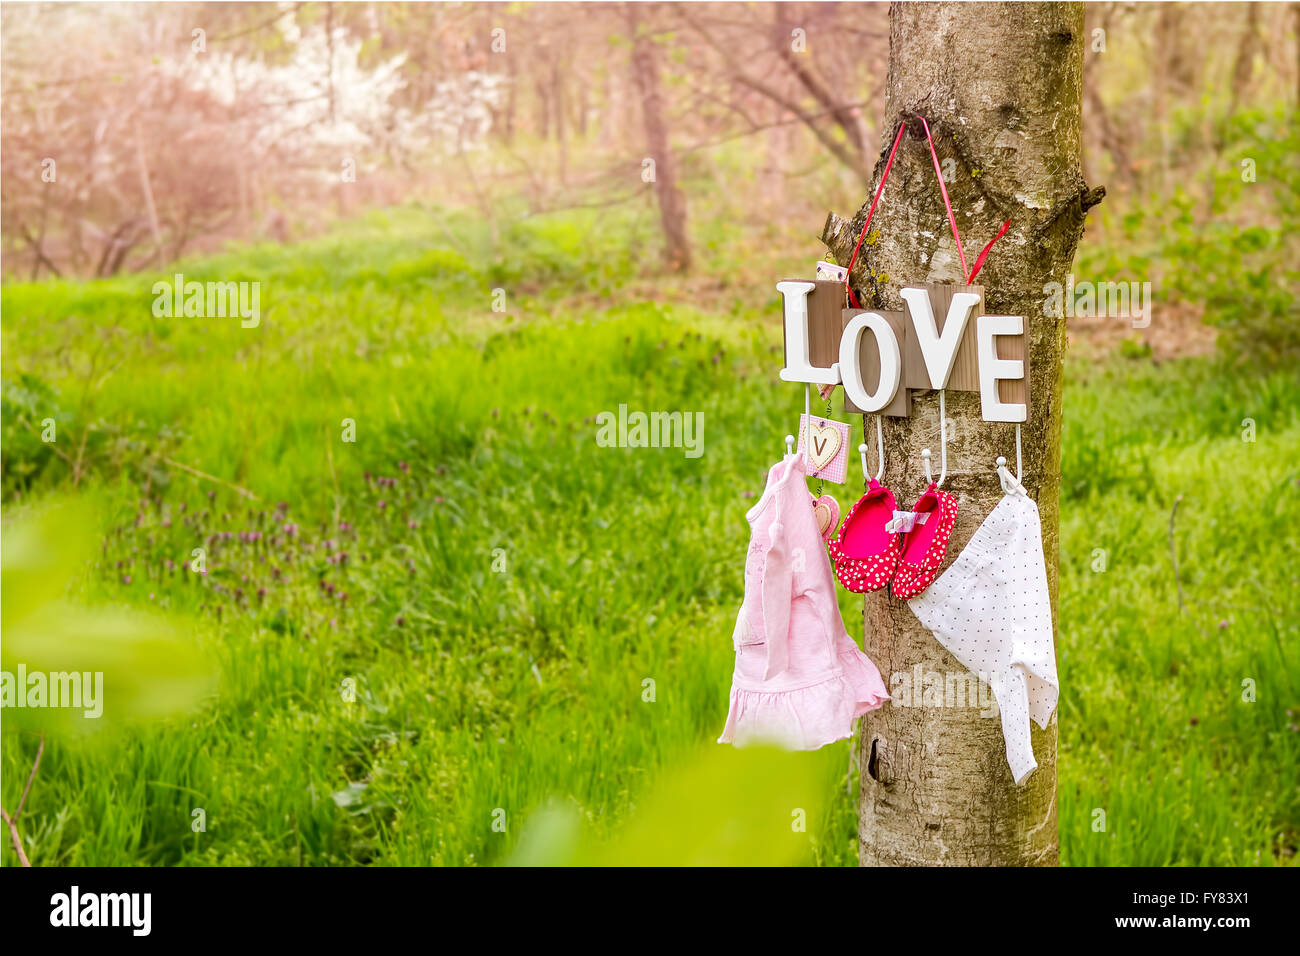 Pink baby shoes and dress hanging from a love text on the tree Stock Photo